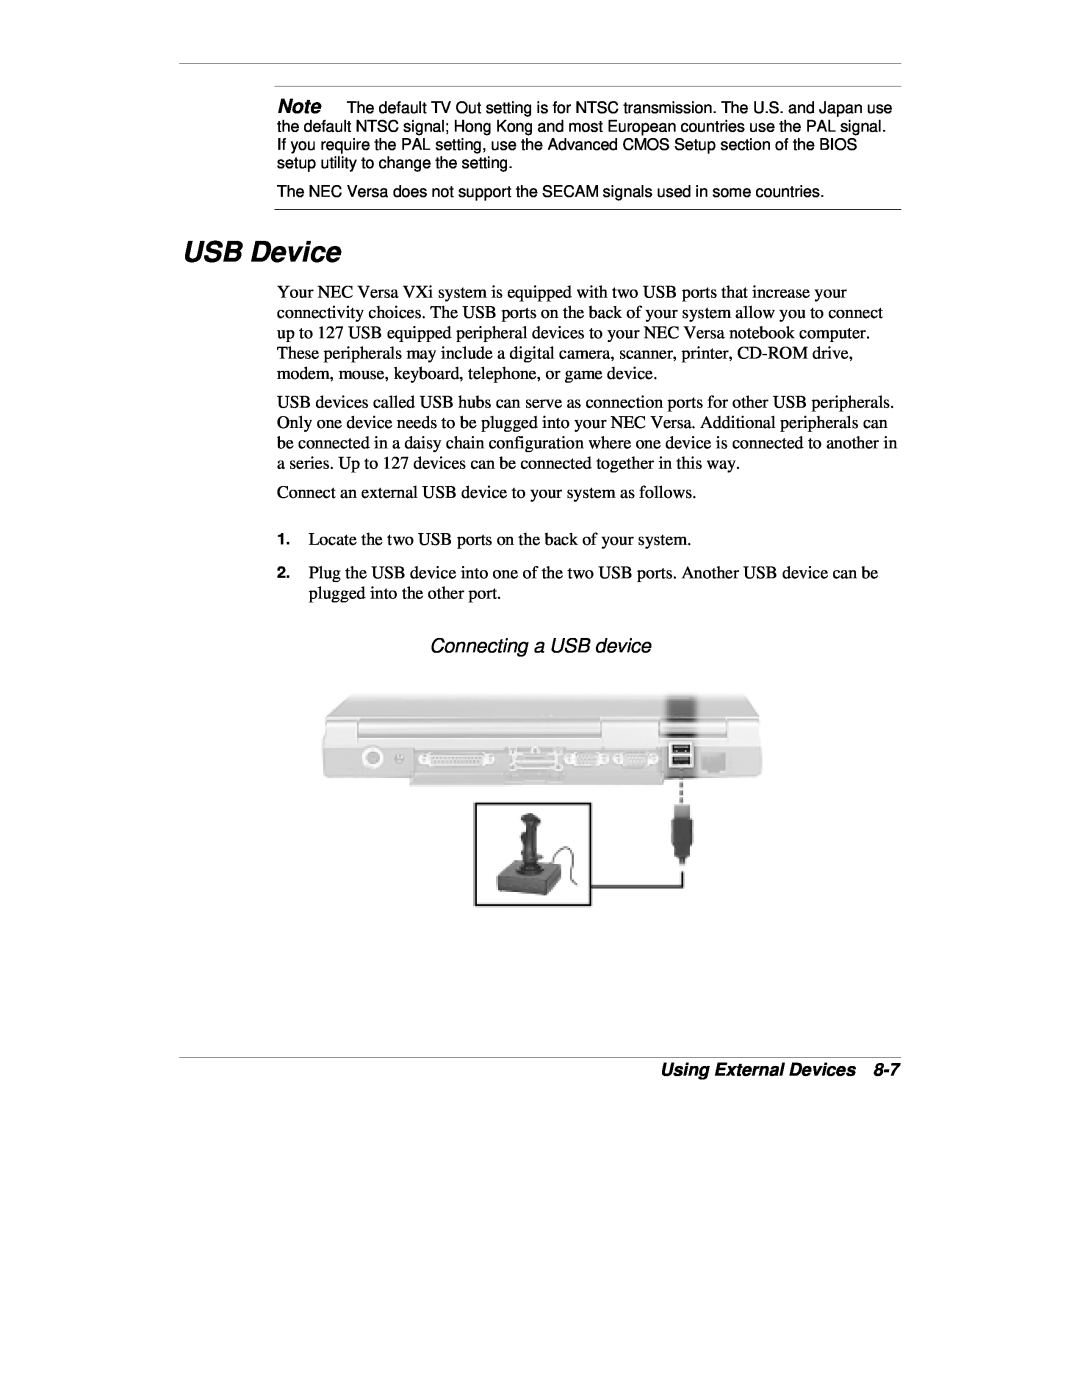 NEC VXi manual USB Device, Connecting a USB device, Using External Devices 